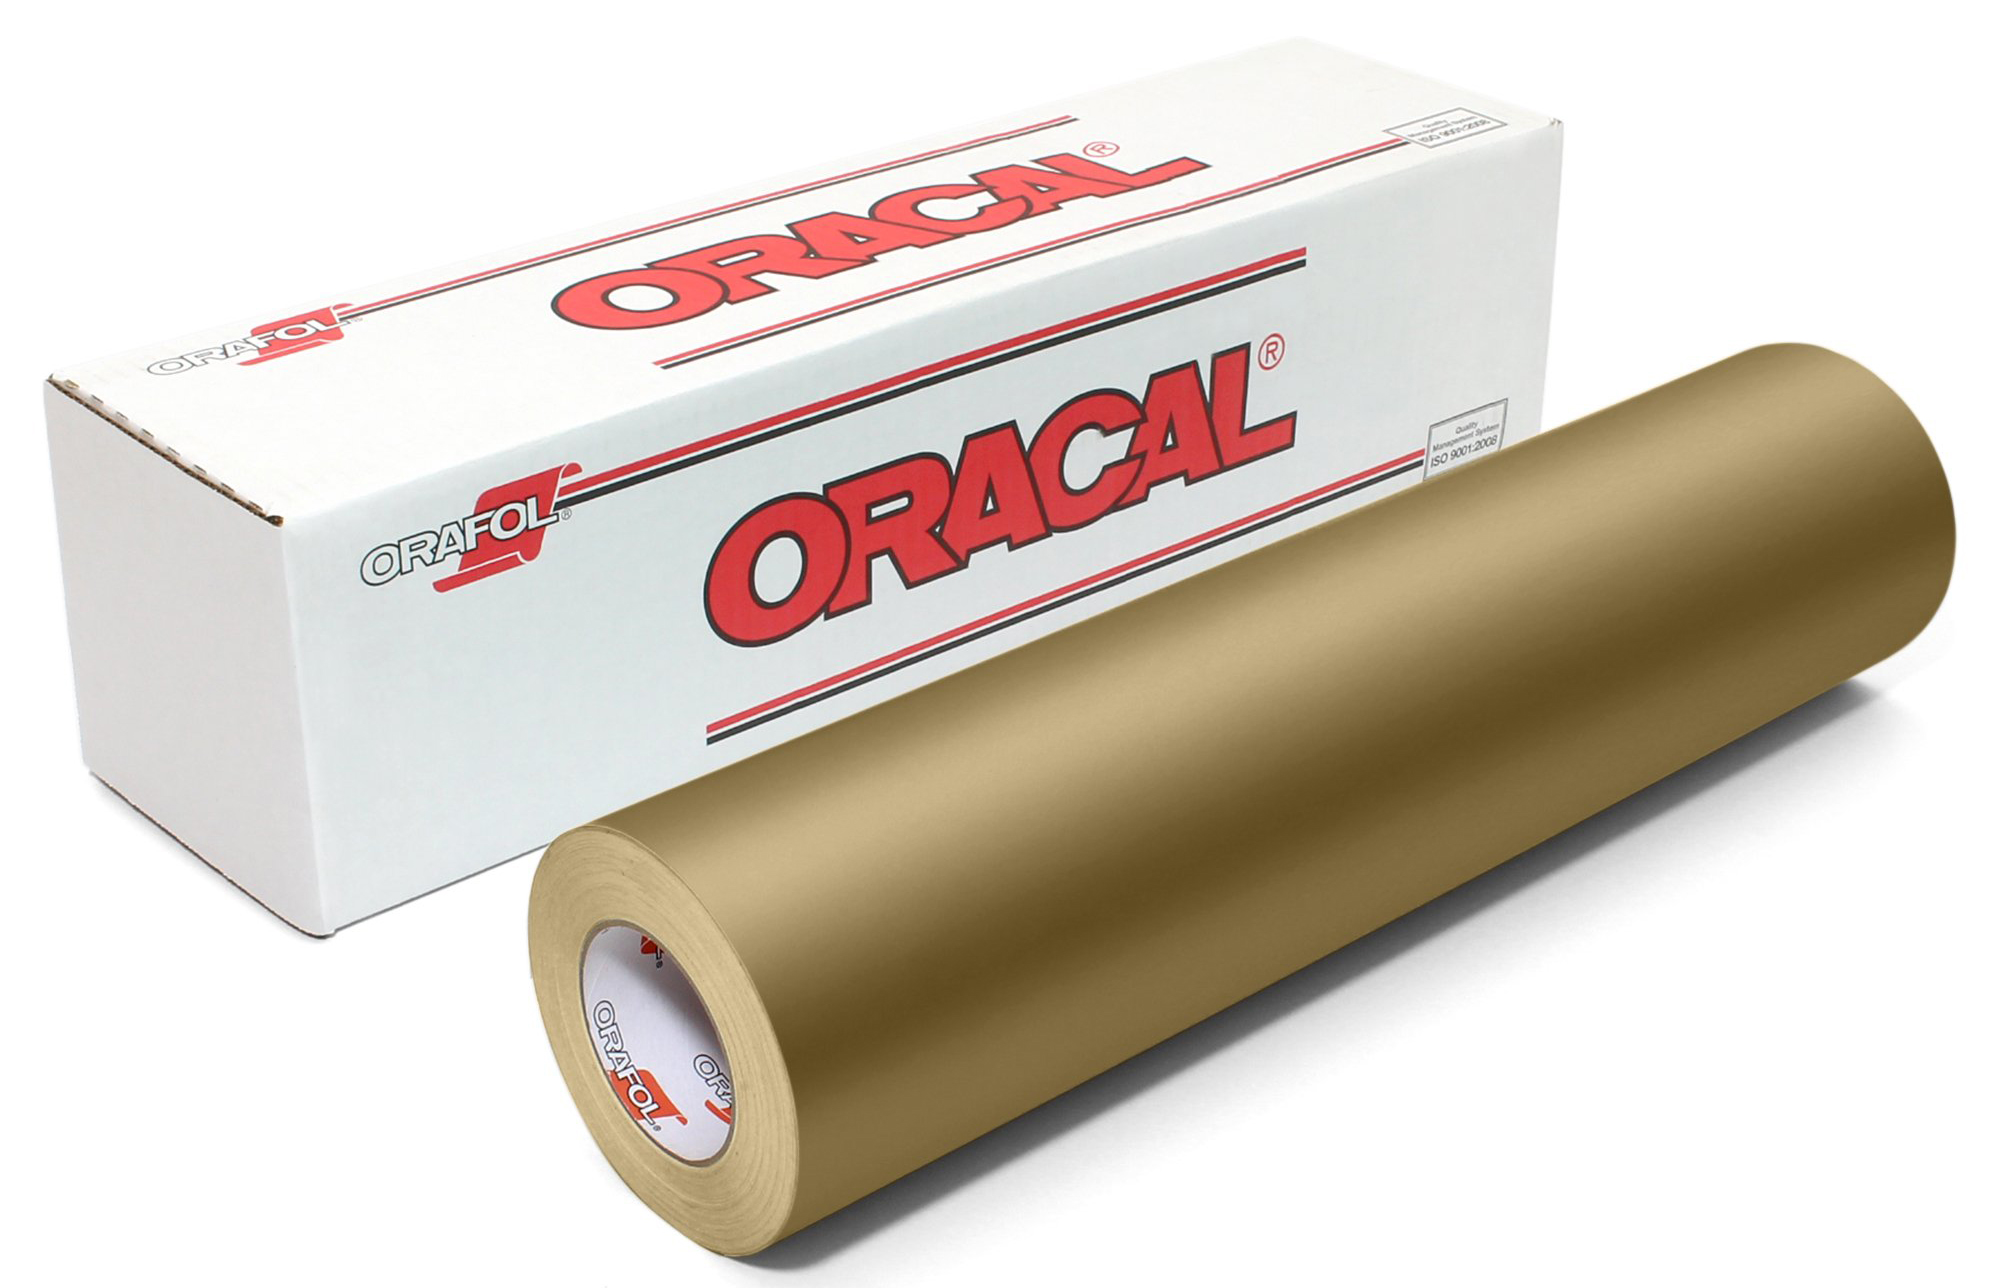 24IN GOLD MATTE 641 ECONOMY CAL - Oracal 641 Economy Calendered PVC Film